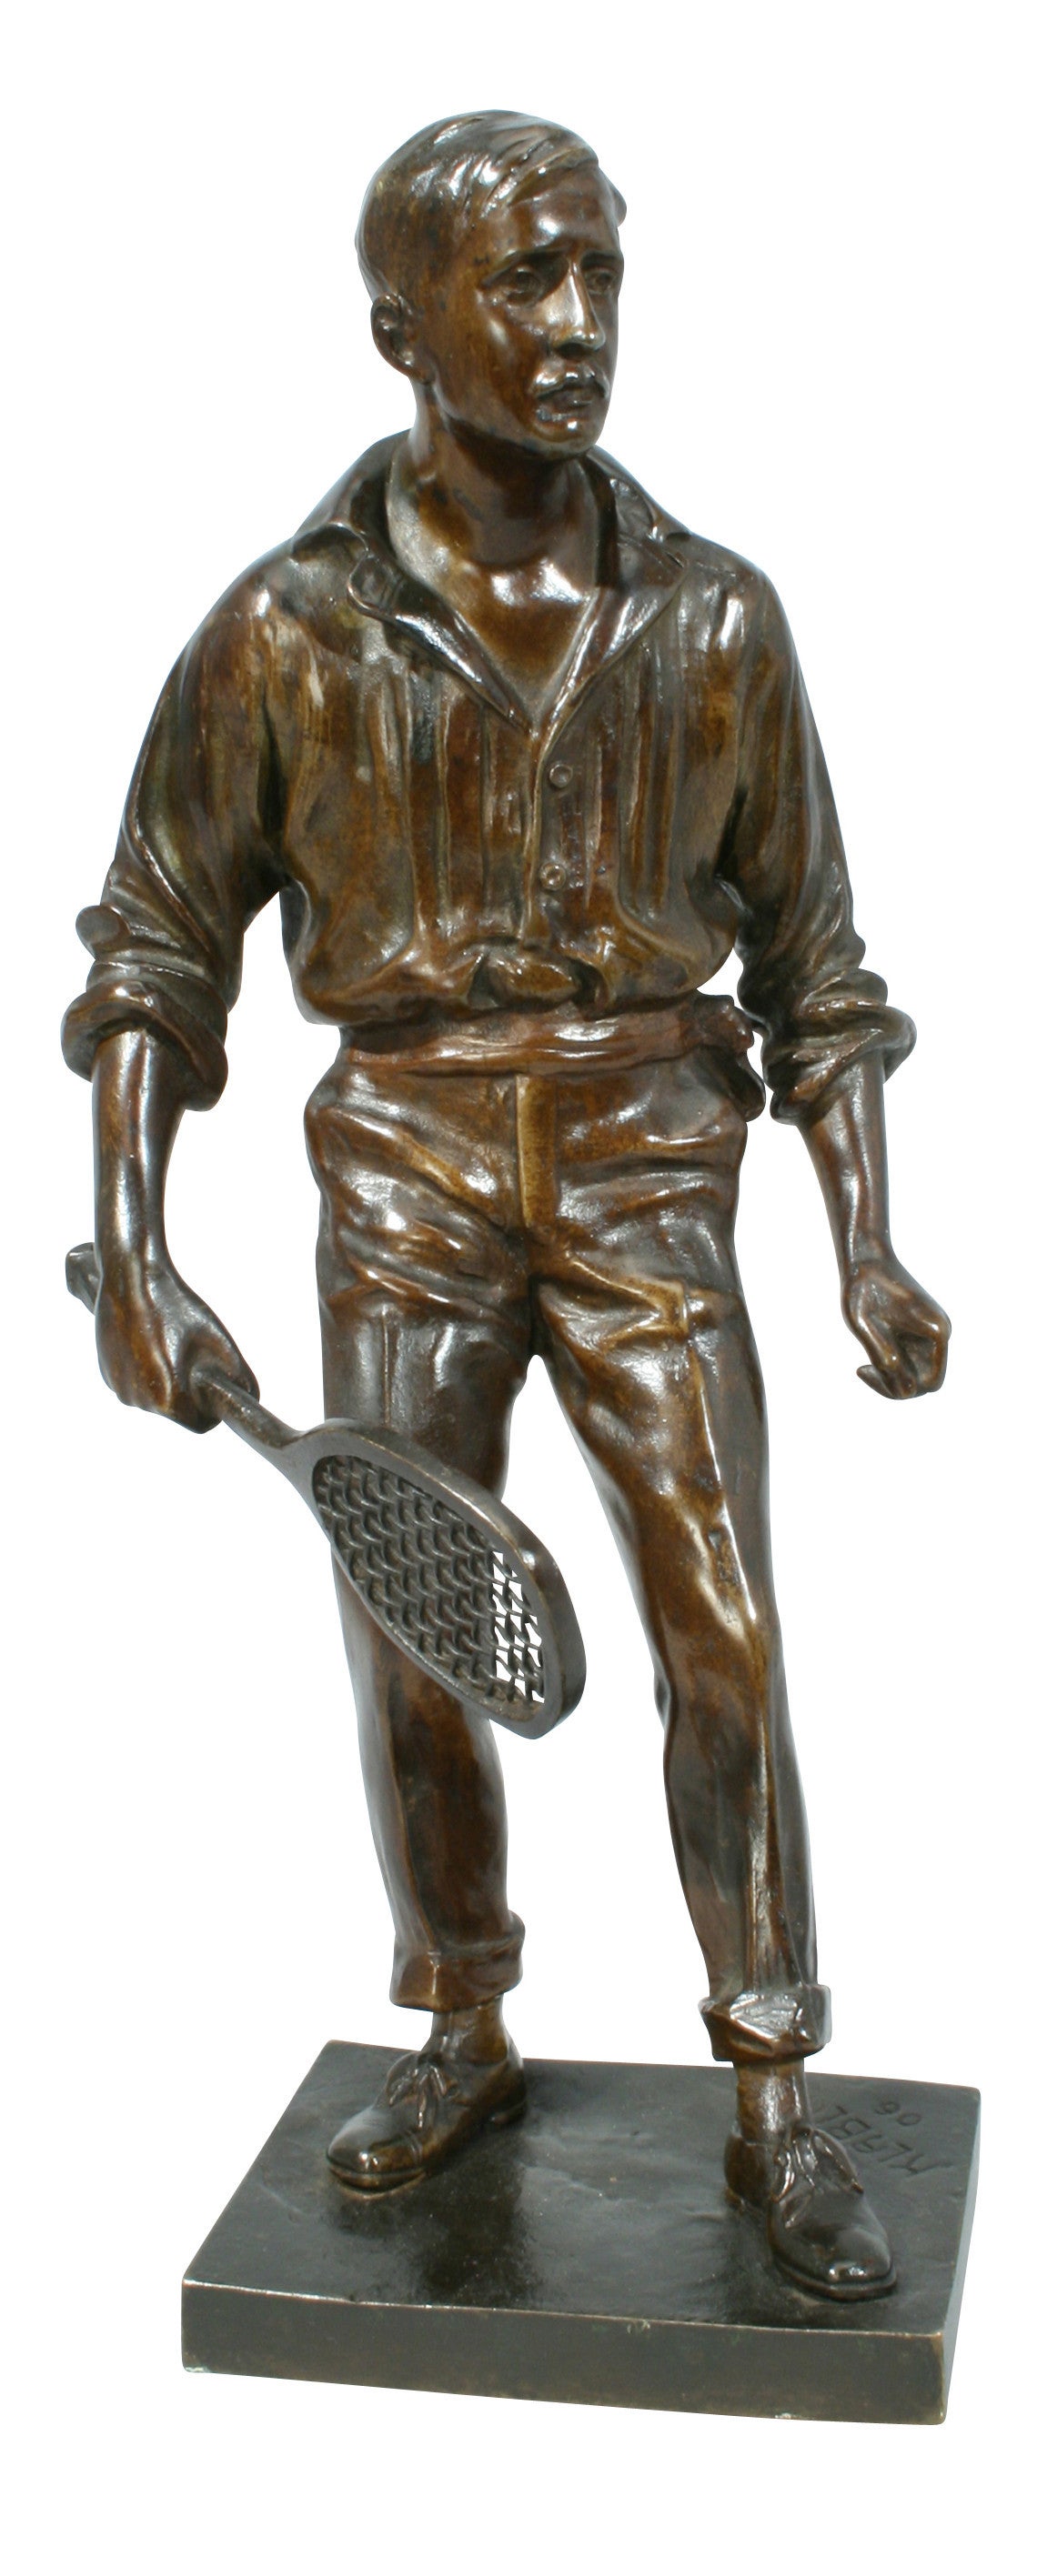 Vintage Bronze Tennis Figure, Renshaw. 
A rare bronze figure of a tennis player (one of the Renshaw brothers) holding a square headed racket. An excellent model with good colour and patination. Signed - “Klablena ‘06”. 
Eduard Klablena 1881-1933,